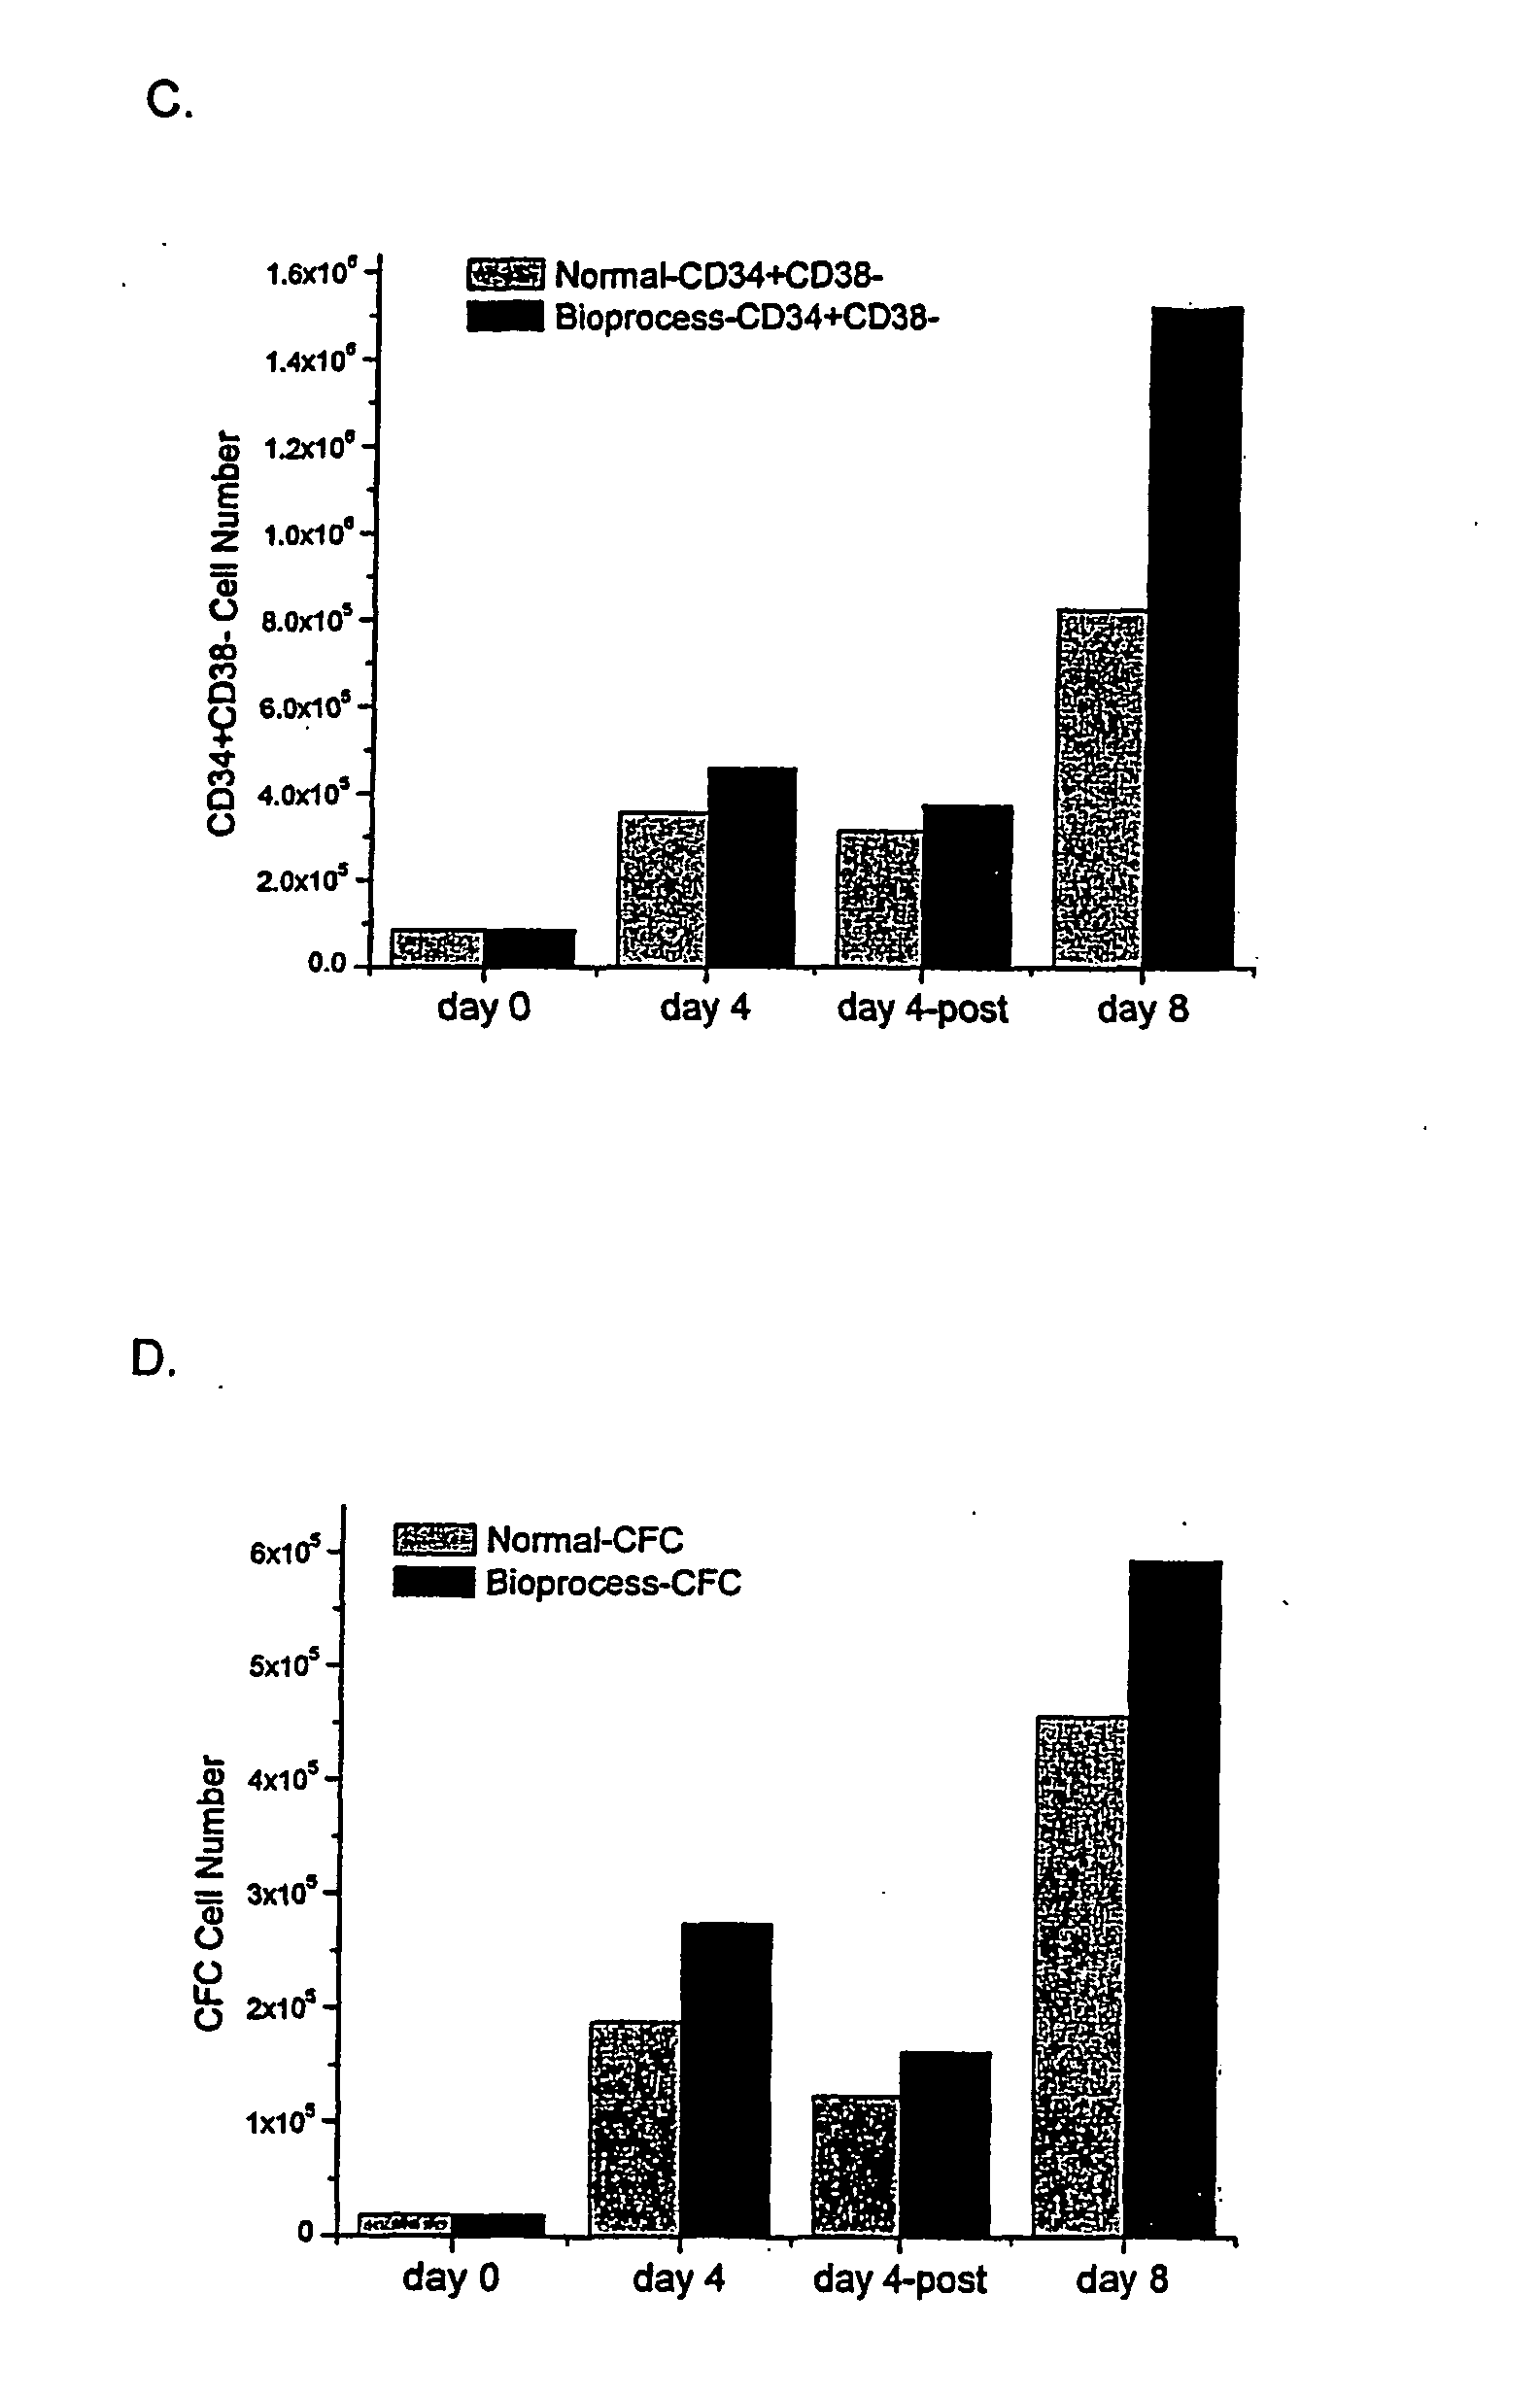 Apparatus and methods for amplification of blood stem cell numbers